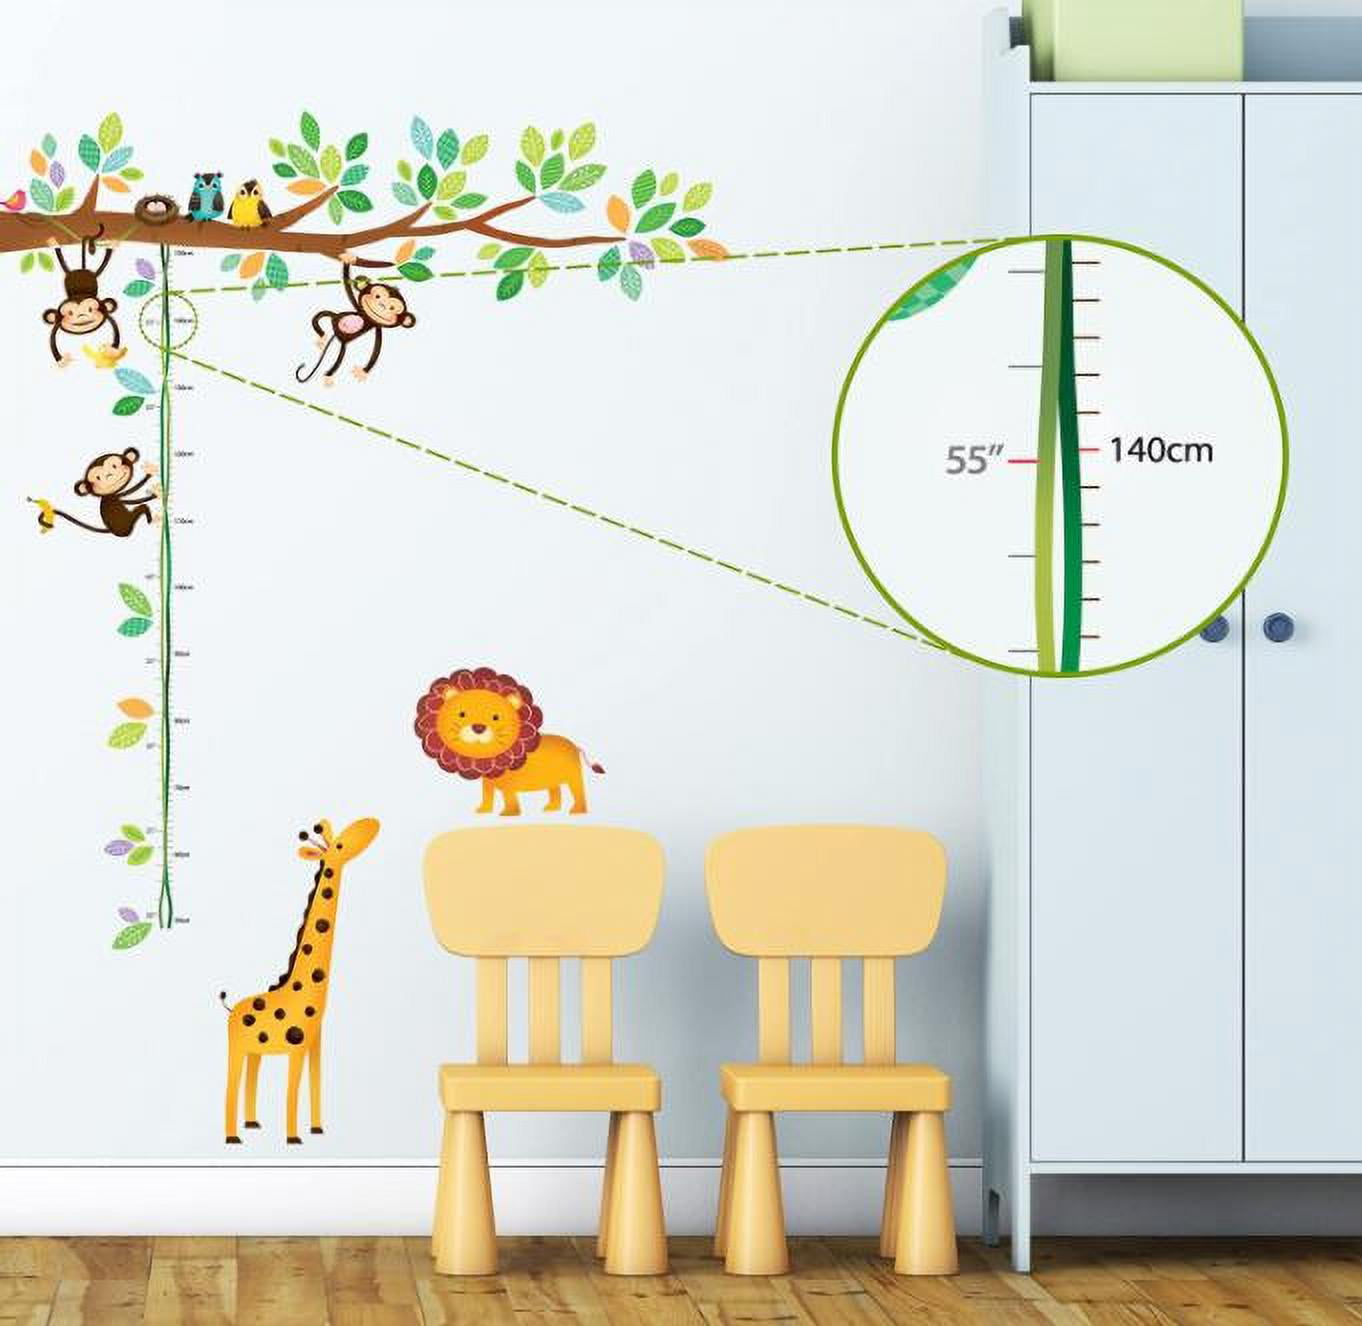 40 Stickers Included Height Chart Jungle Design Free Postage 